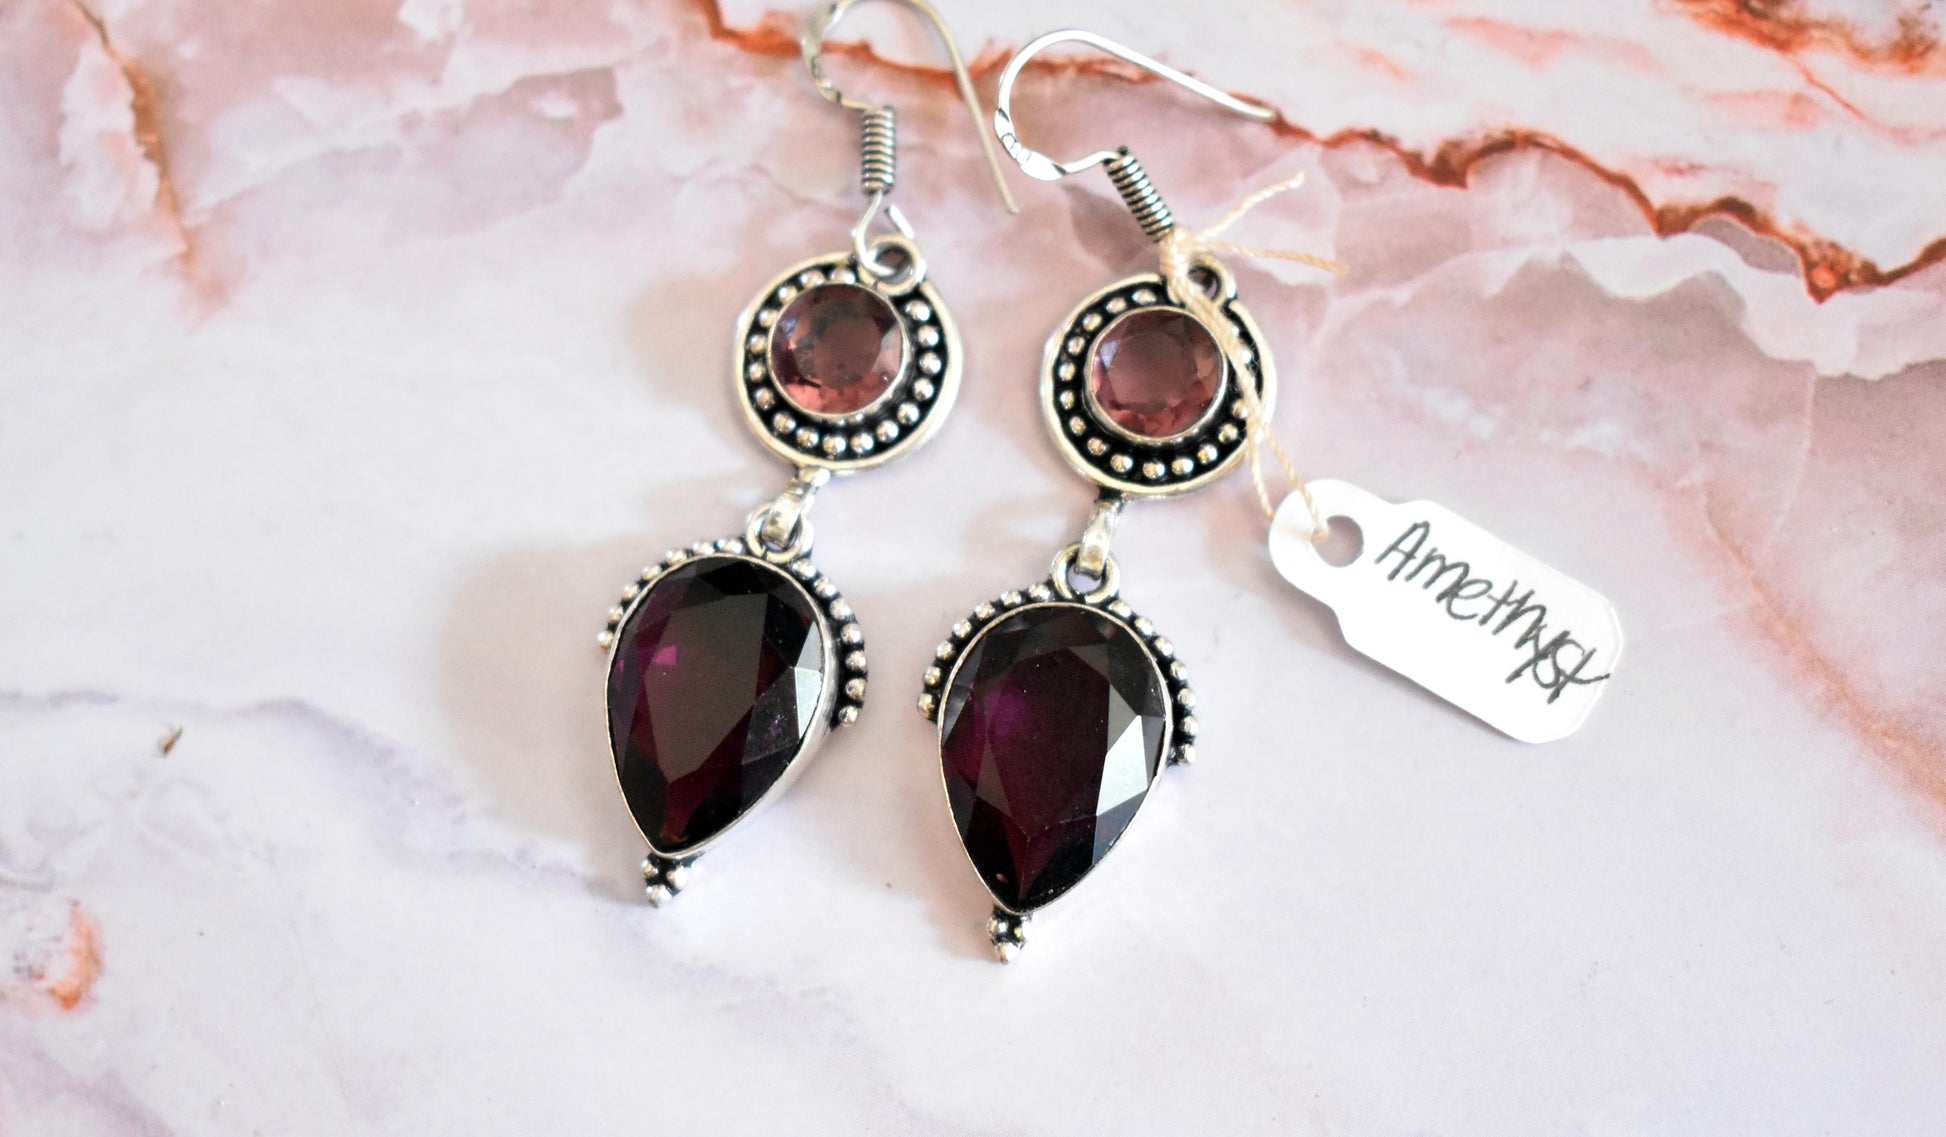 stones-of-transformation - Amethyst Two Stone Earrings - Stones of Transformation - 